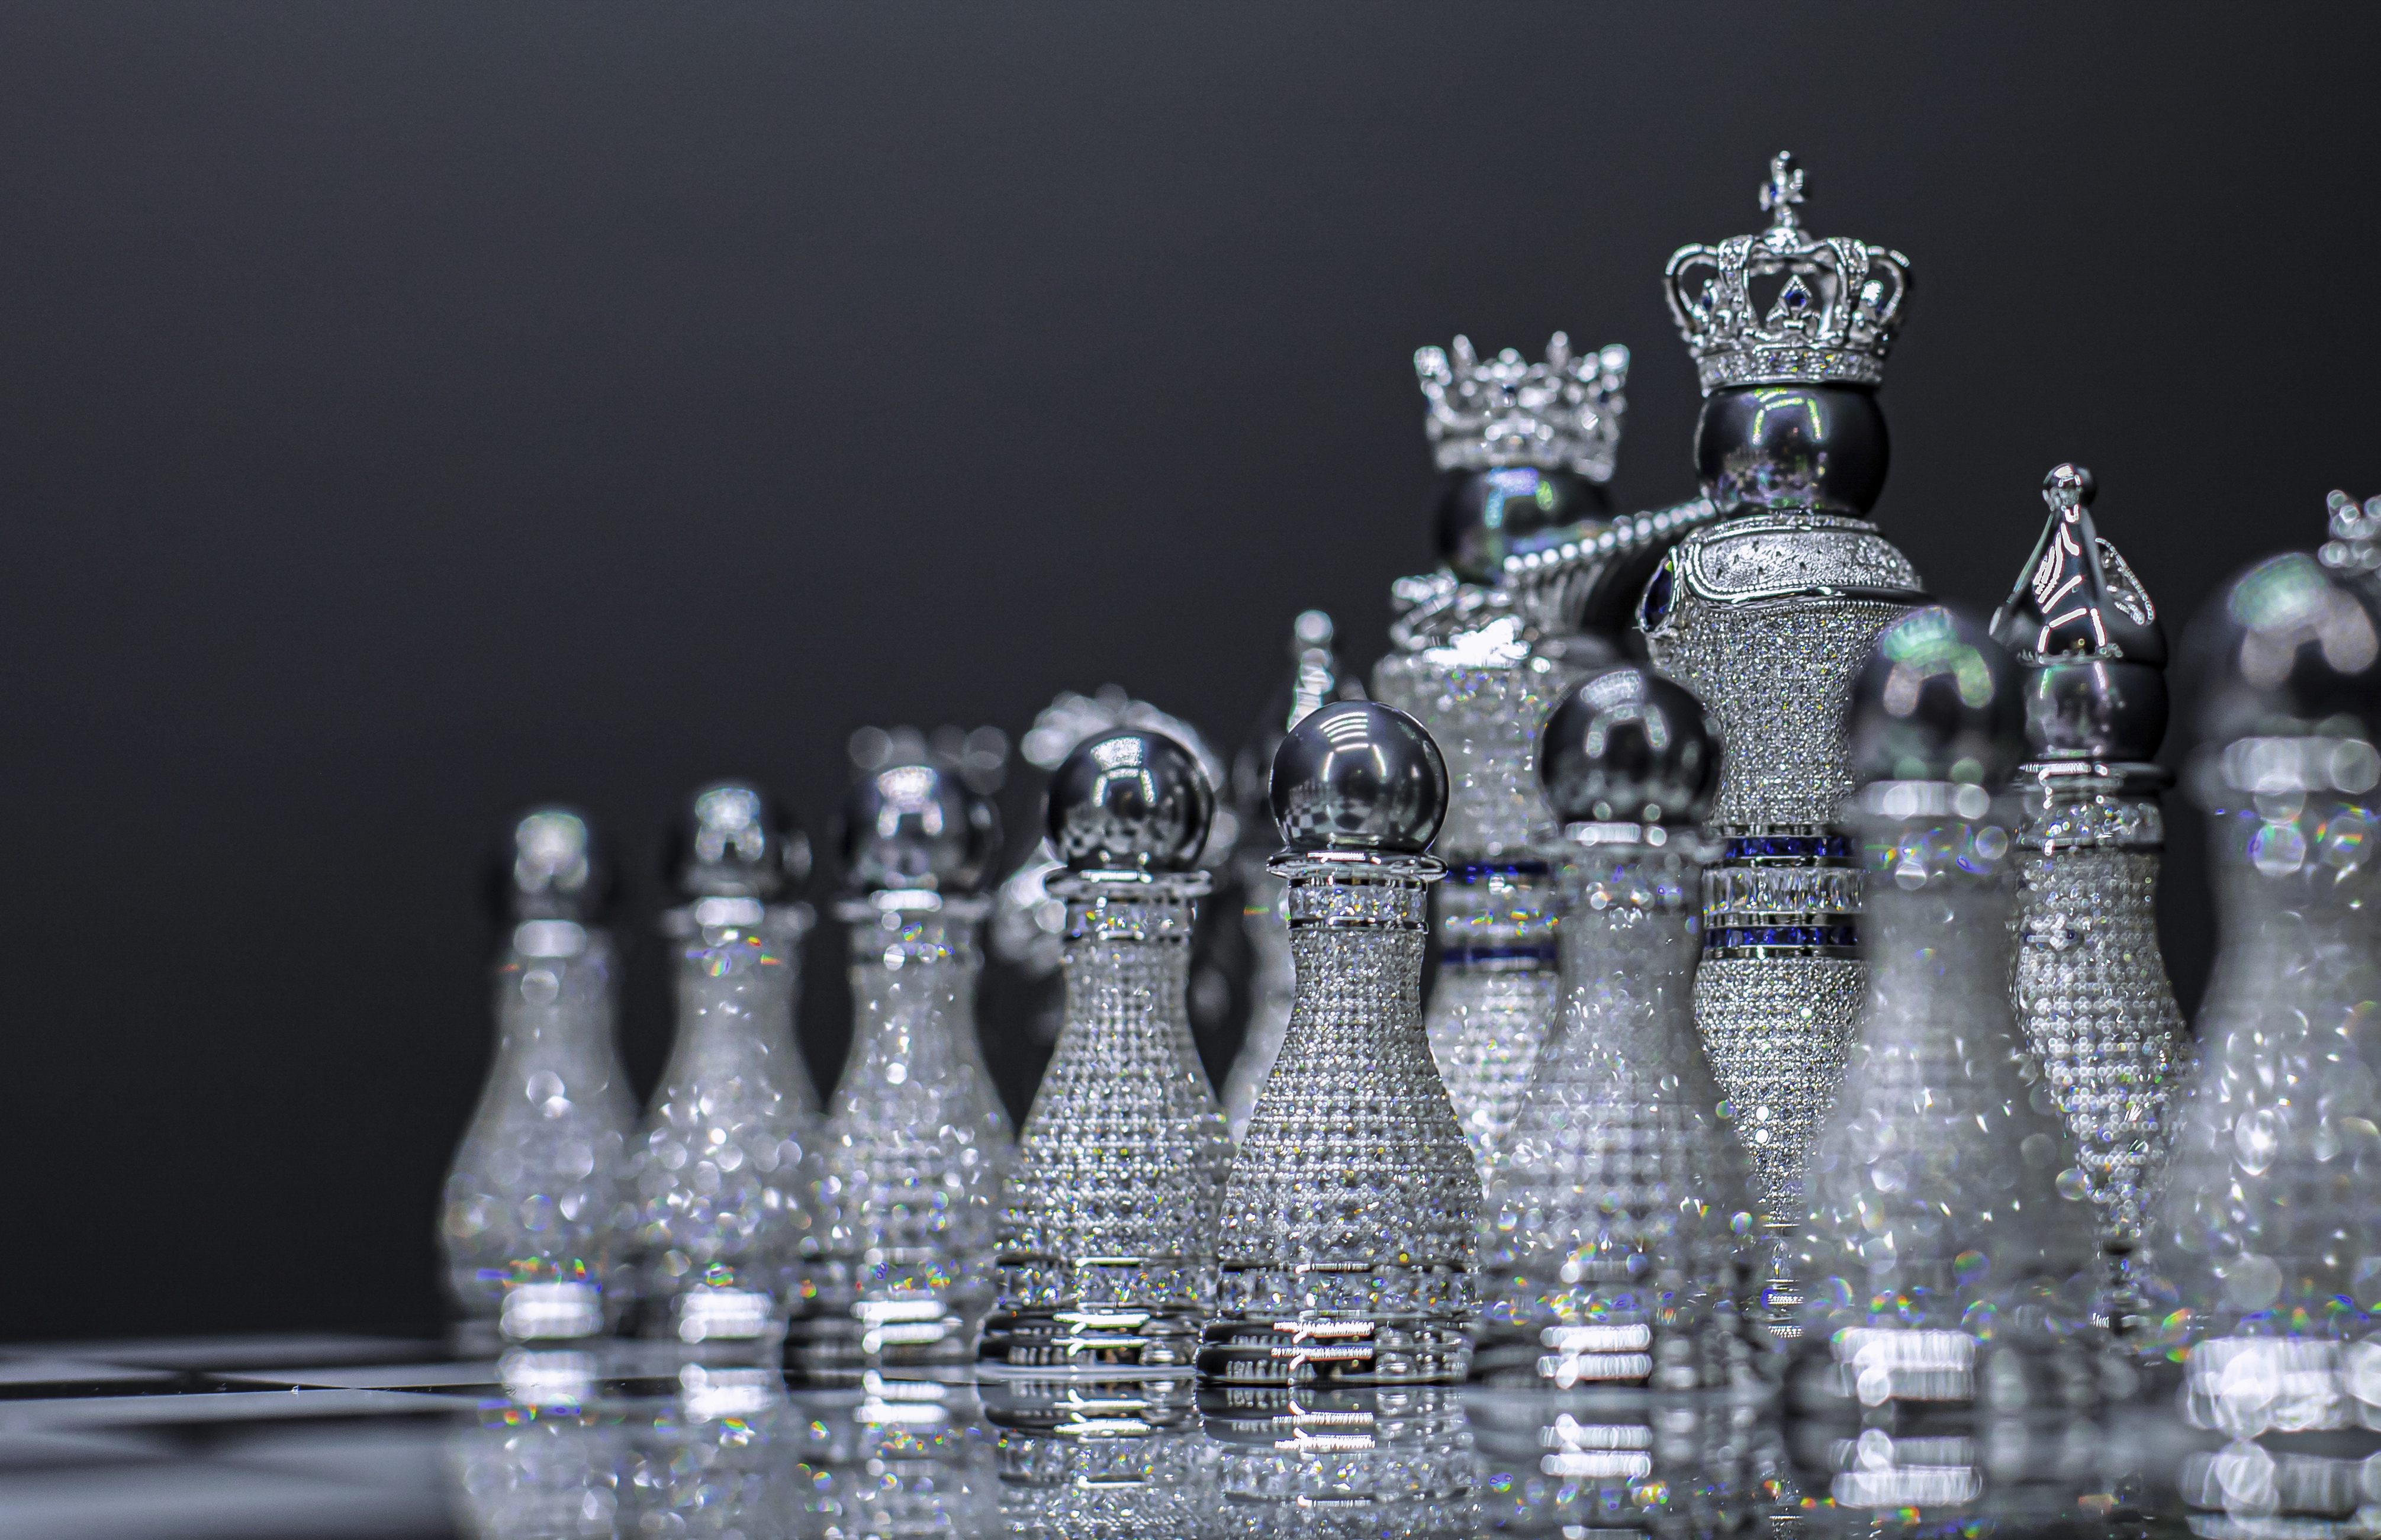 Grand Collection Signature Series Luxury Staunton Chess Pieces in